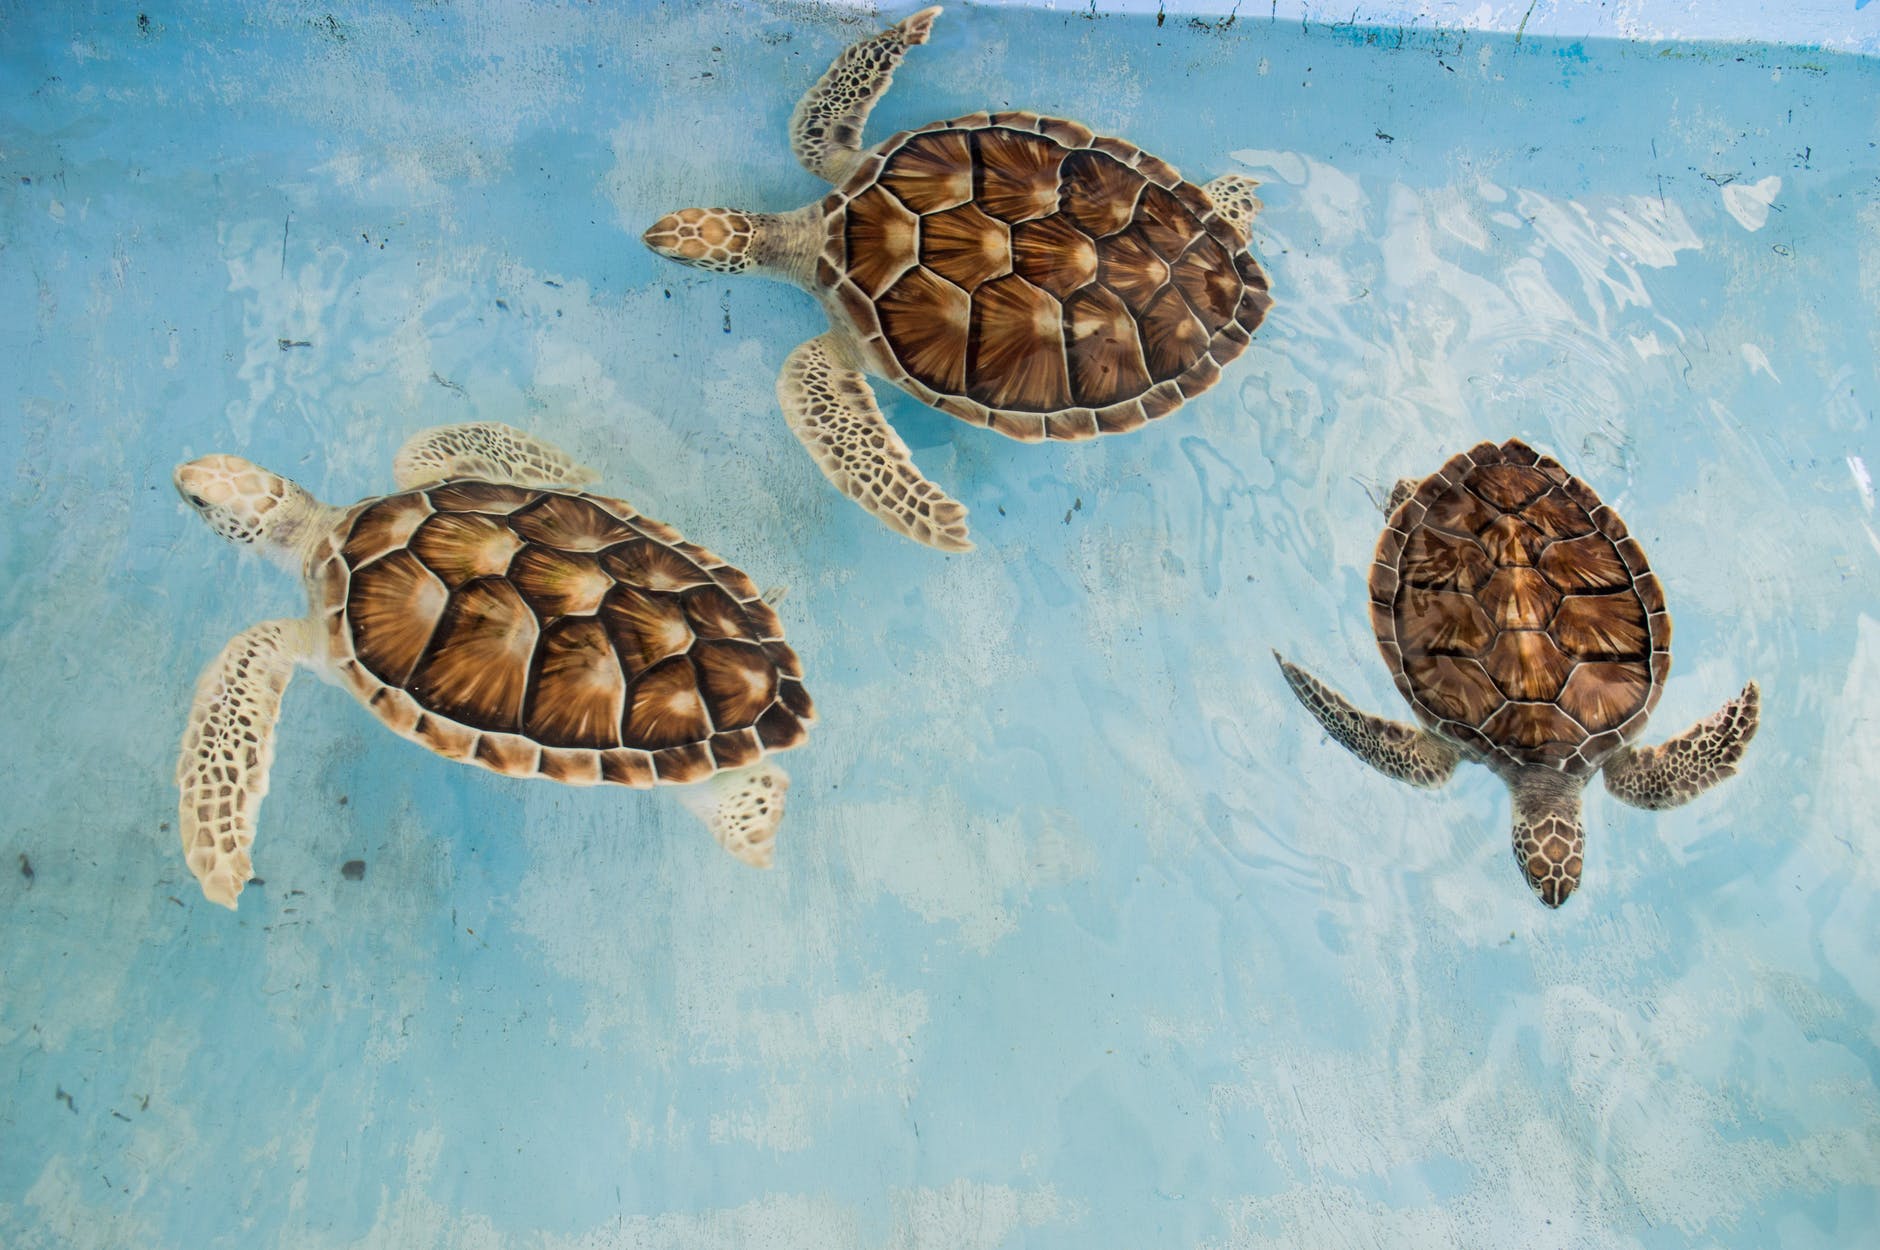 three tortoises swimming in a shallow pool of water